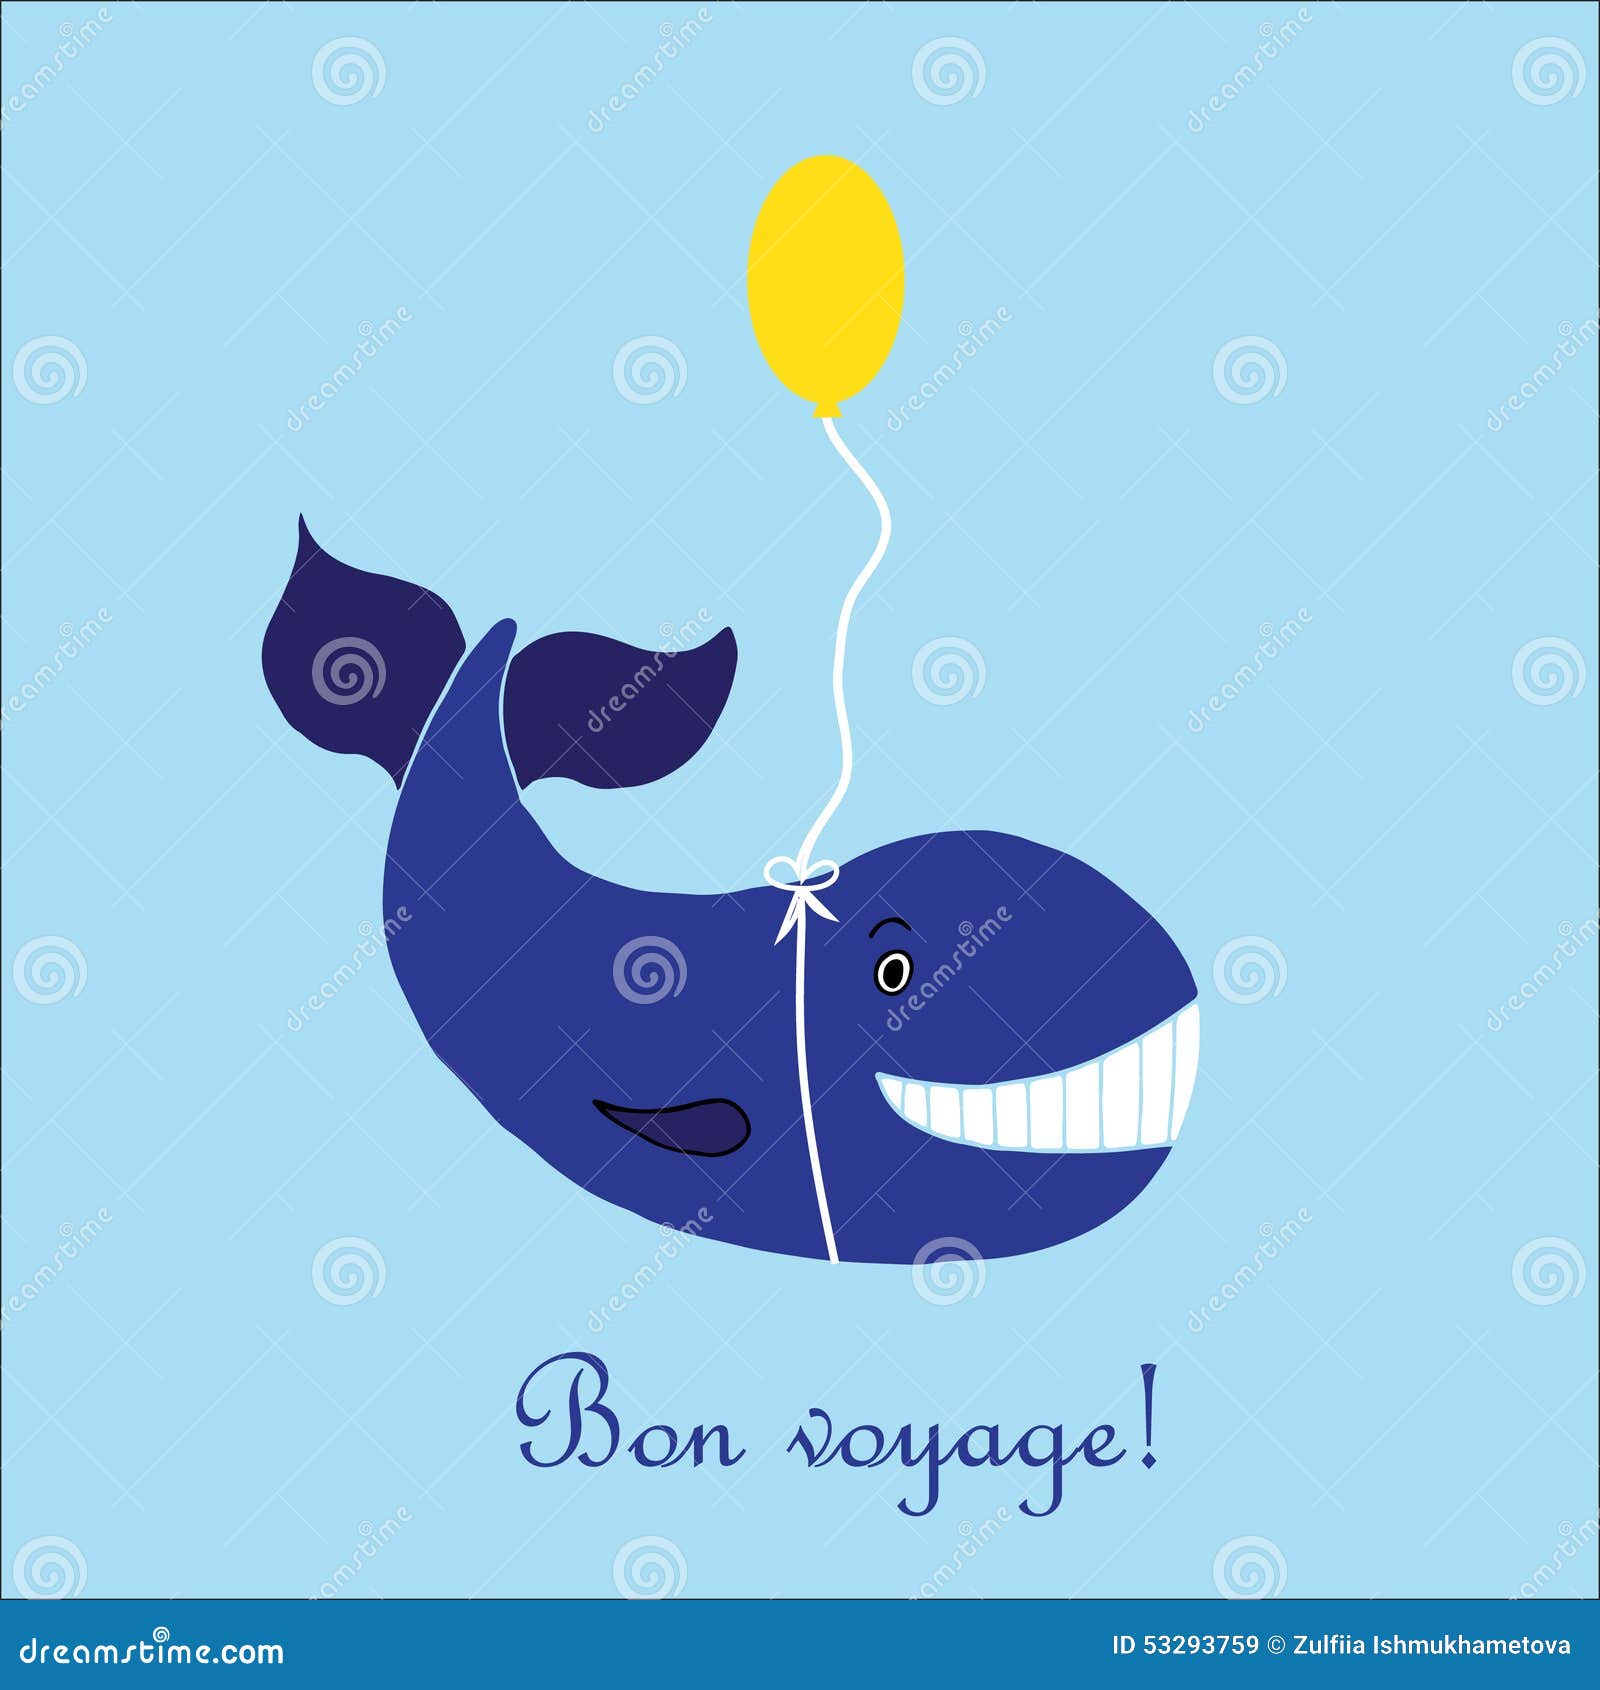 Illustration With Blue While With Balloon And Text In